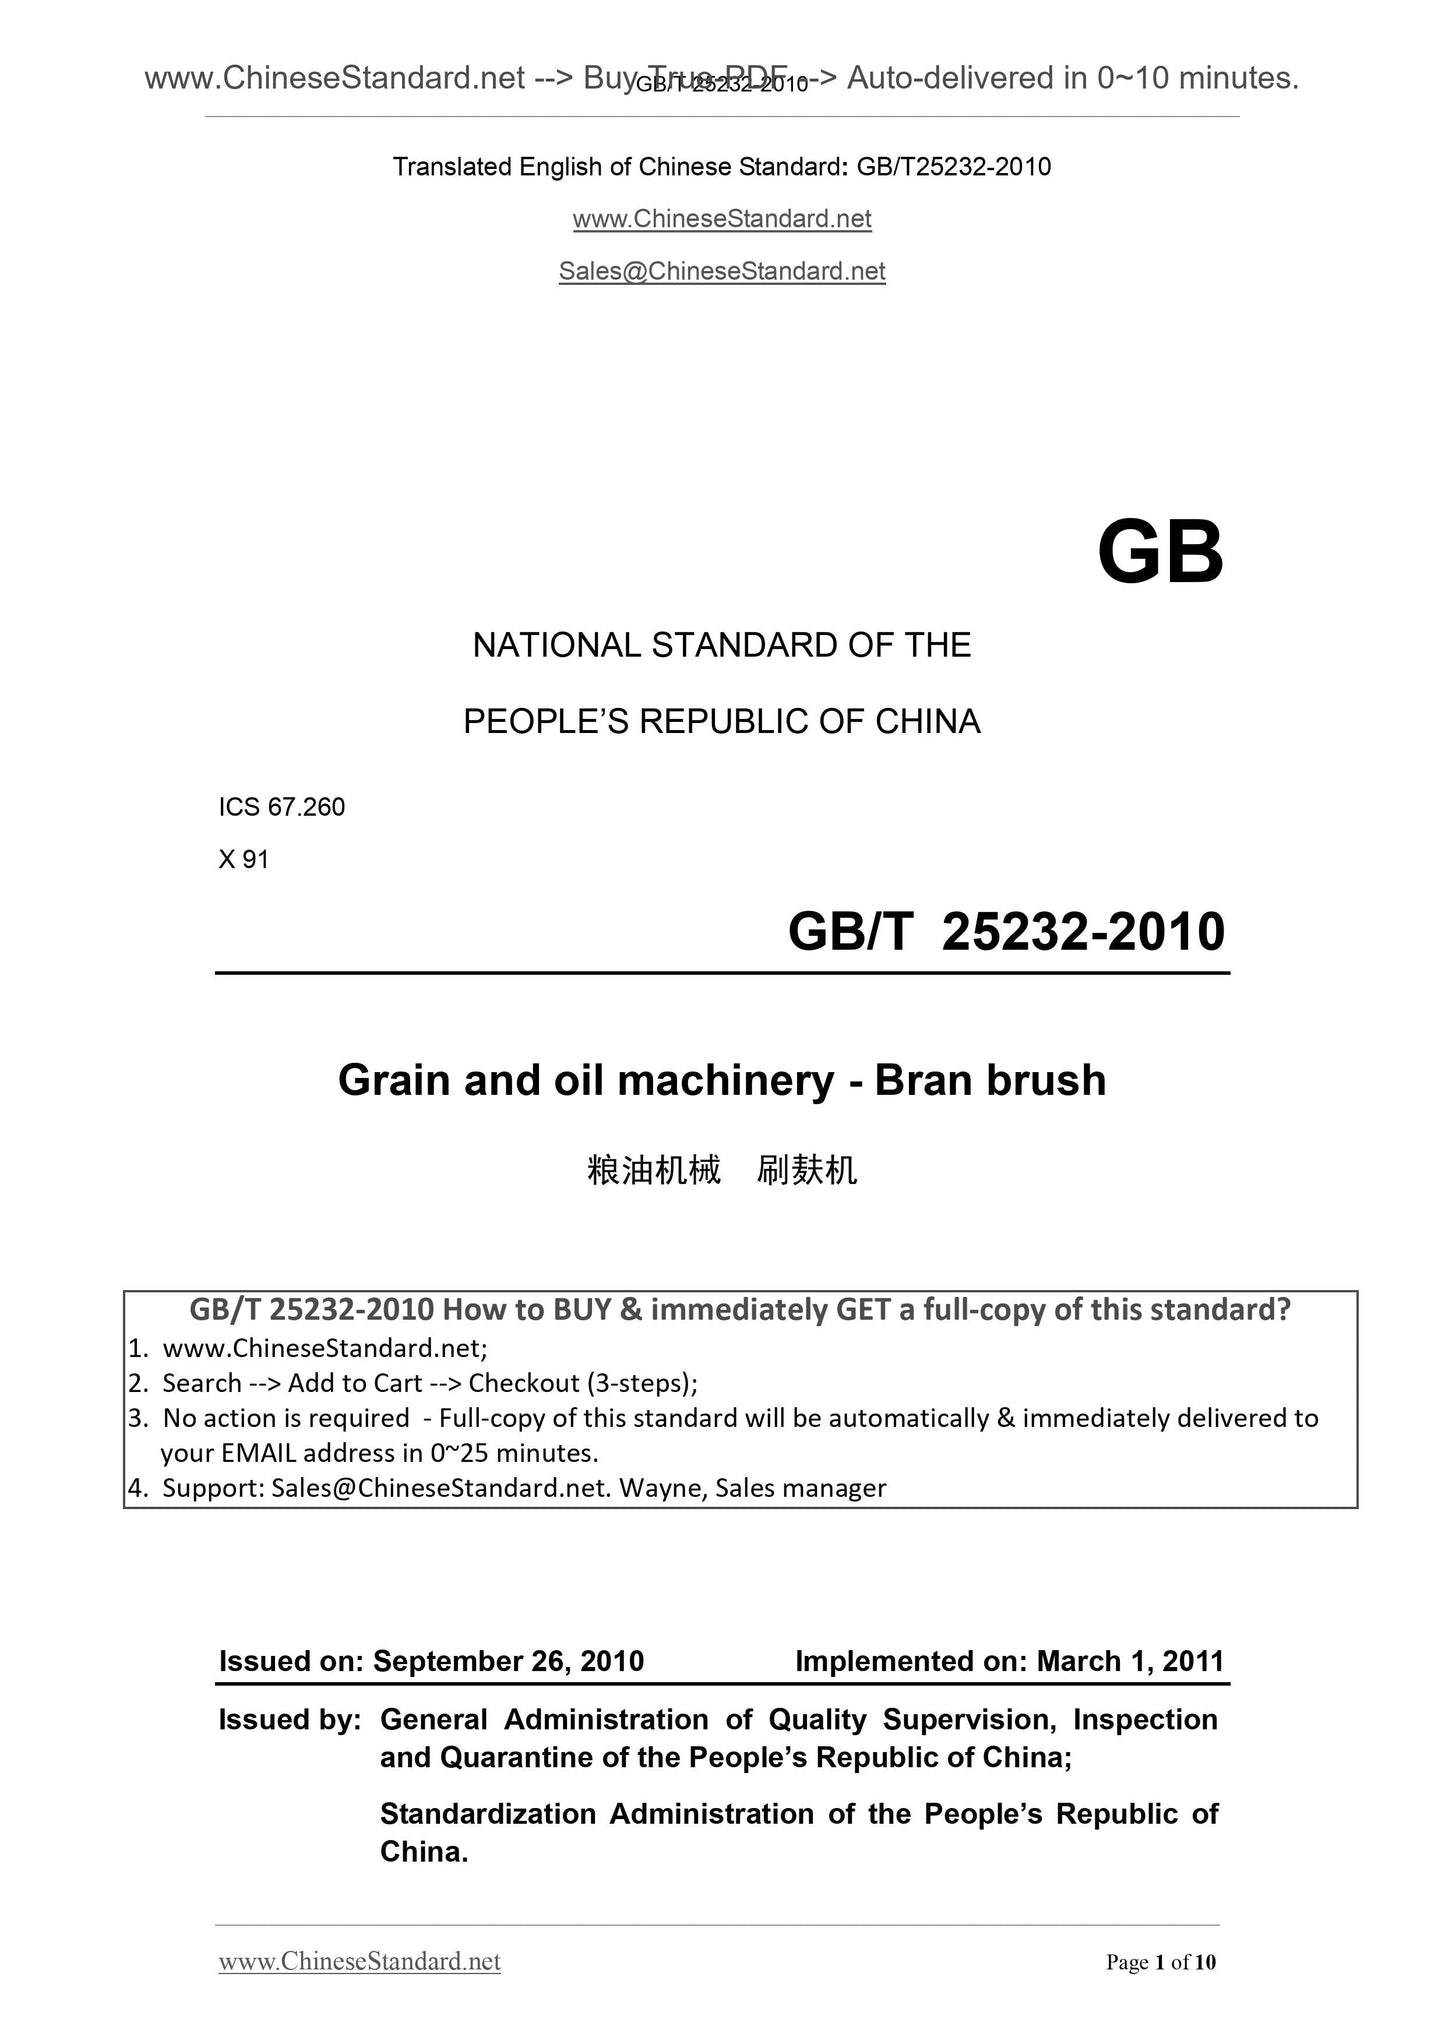 GB/T 25232-2010 Page 1